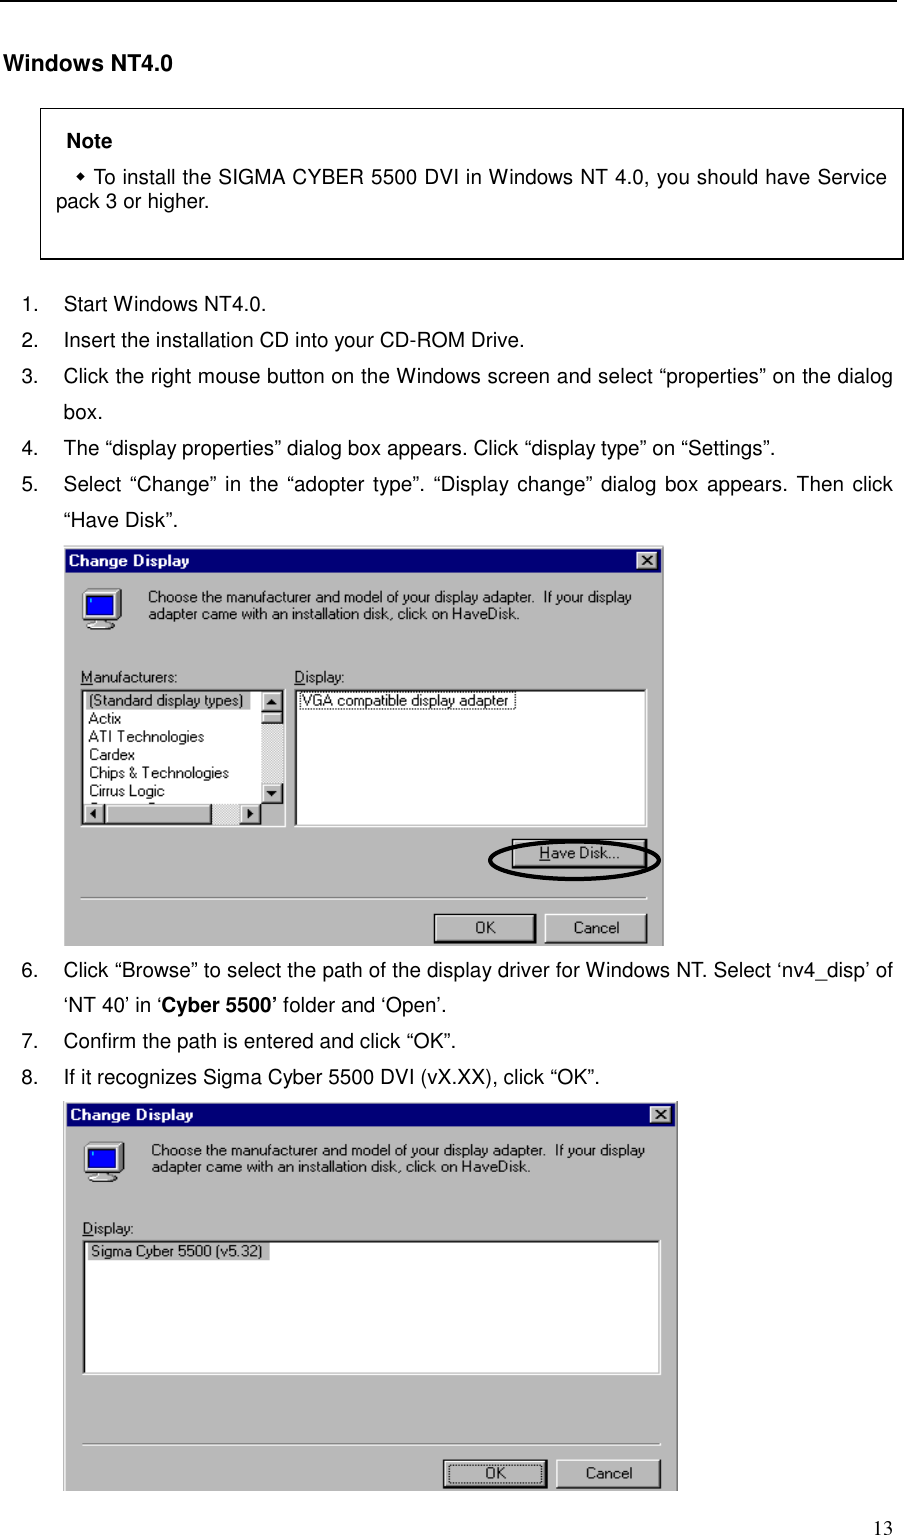     13 Windows NT4.0   1.  Start Windows NT4.0. 2.  Insert the installation CD into your CD-ROM Drive. 3.  Click the right mouse button on the Windows screen and select “properties” on the dialog box. 4.  The “display properties” dialog box appears. Click “display type” on “Settings”. 5.  Select “Change” in the “adopter type”. “Display change” dialog box appears. Then click “Have Disk”.       6.  Click “Browse” to select the path of the display driver for Windows NT. Select ‘nv4_disp’ of ‘NT 40’ in ‘Cyber 5500’ folder and ‘Open’. 7.  Confirm the path is entered and click “OK”. 8.  If it recognizes Sigma Cyber 5500 DVI (vX.XX), click “OK”.        Note &quot; To install the SIGMA CYBER 5500 DVI in Windows NT 4.0, you should have Service pack 3 or higher.    